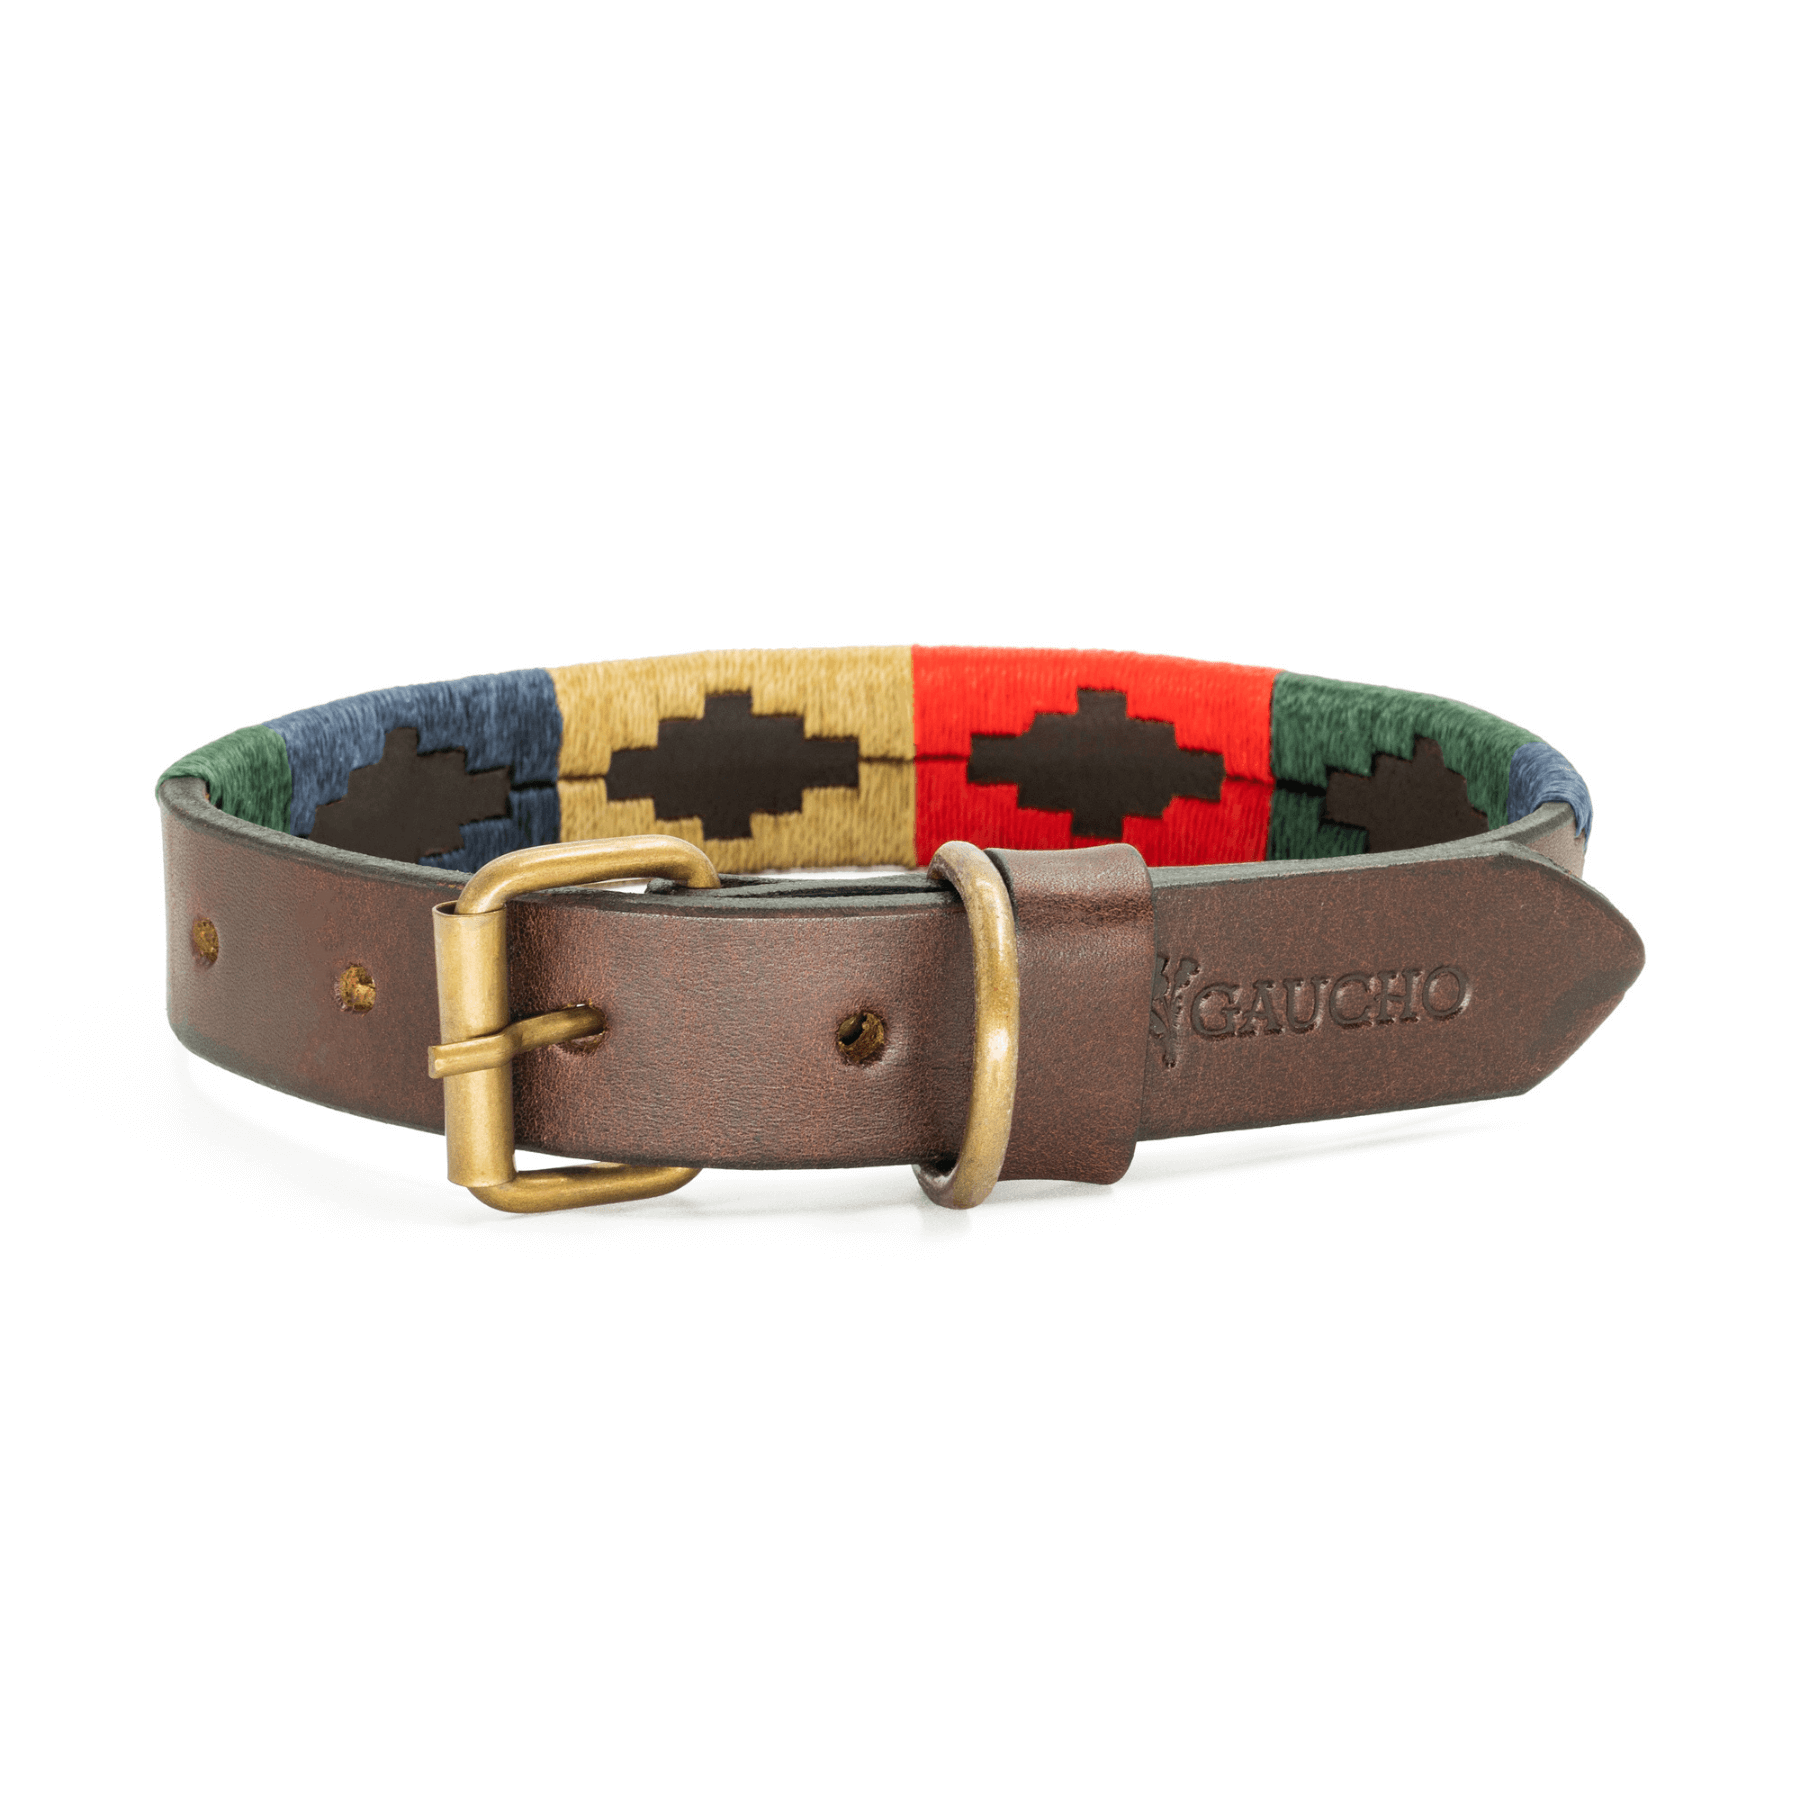 Gaucholife Dogs Embroidered Leather Dog Collar (Calandria)